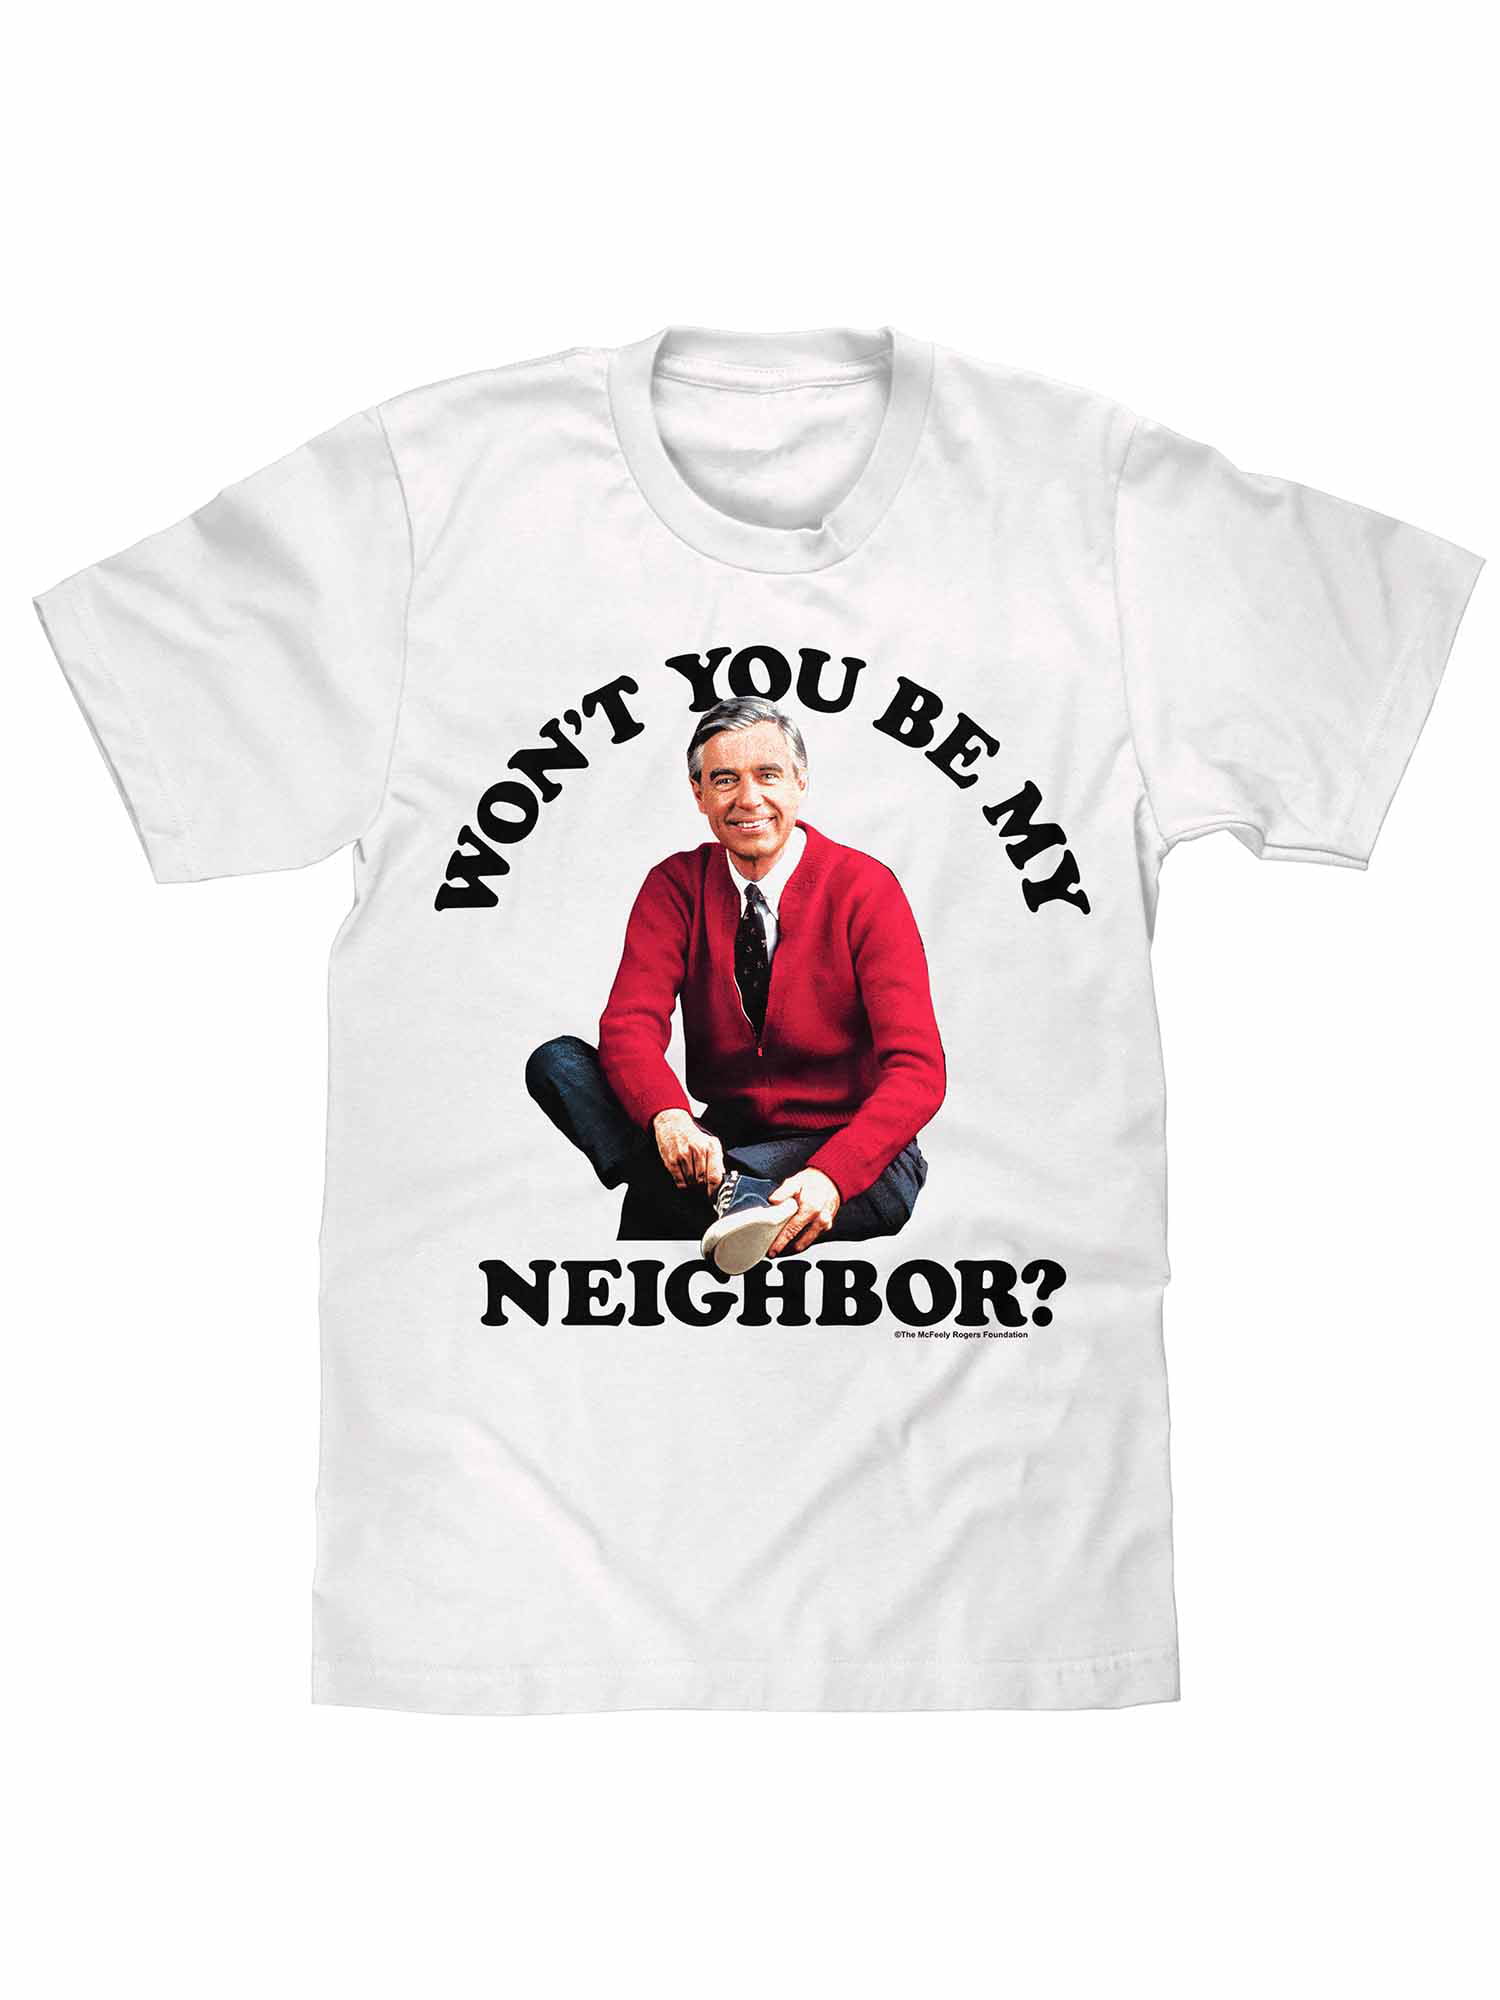 New OOOH YEAH Brand Ladies Mister ROGERS Socks ‘WON’T YOU BE MY NEIGHBOR’